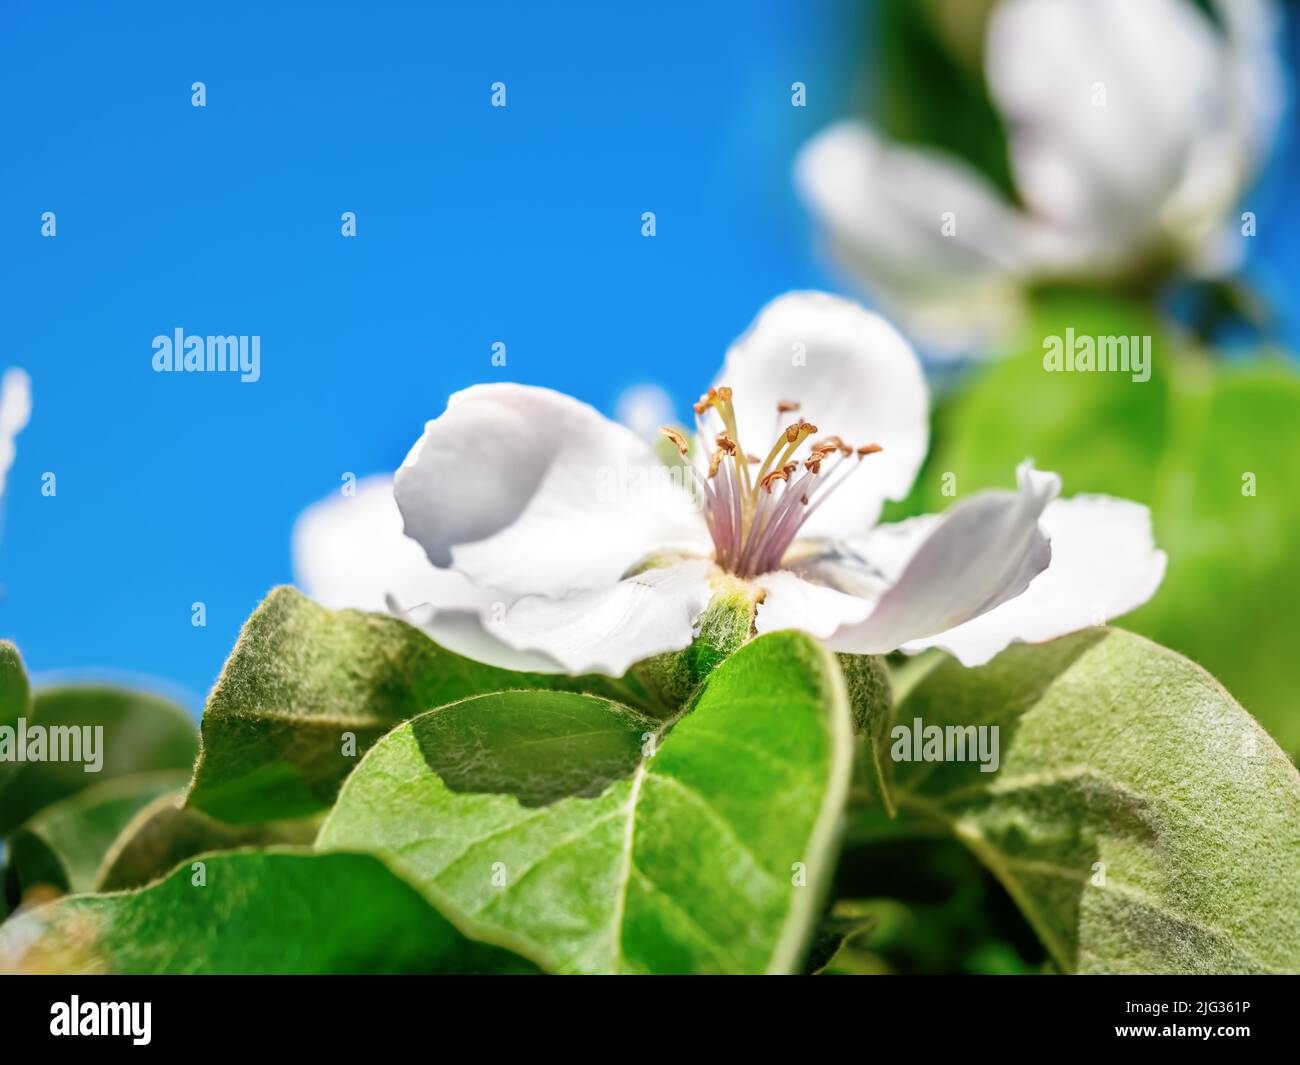 Closeup of apple tree flowers in blossom over blue sky Stock Photo